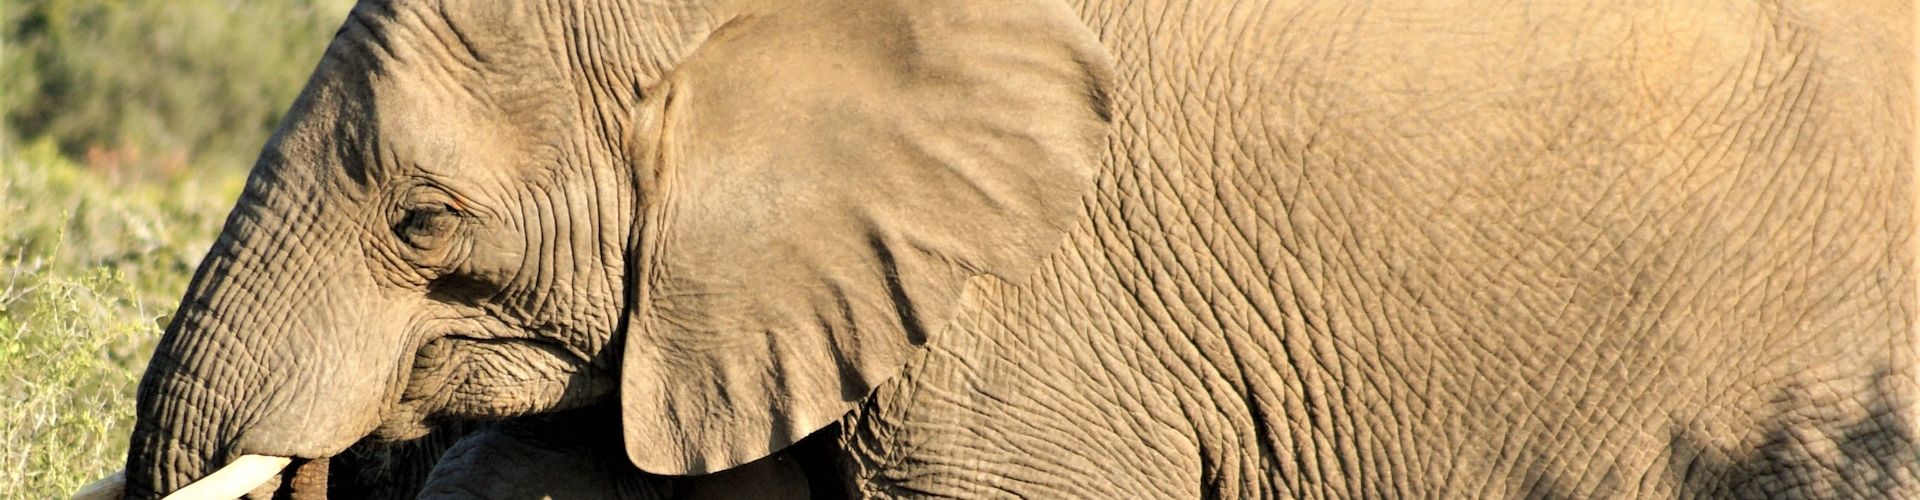 Close up picture of an African Pachyderm (elephant)